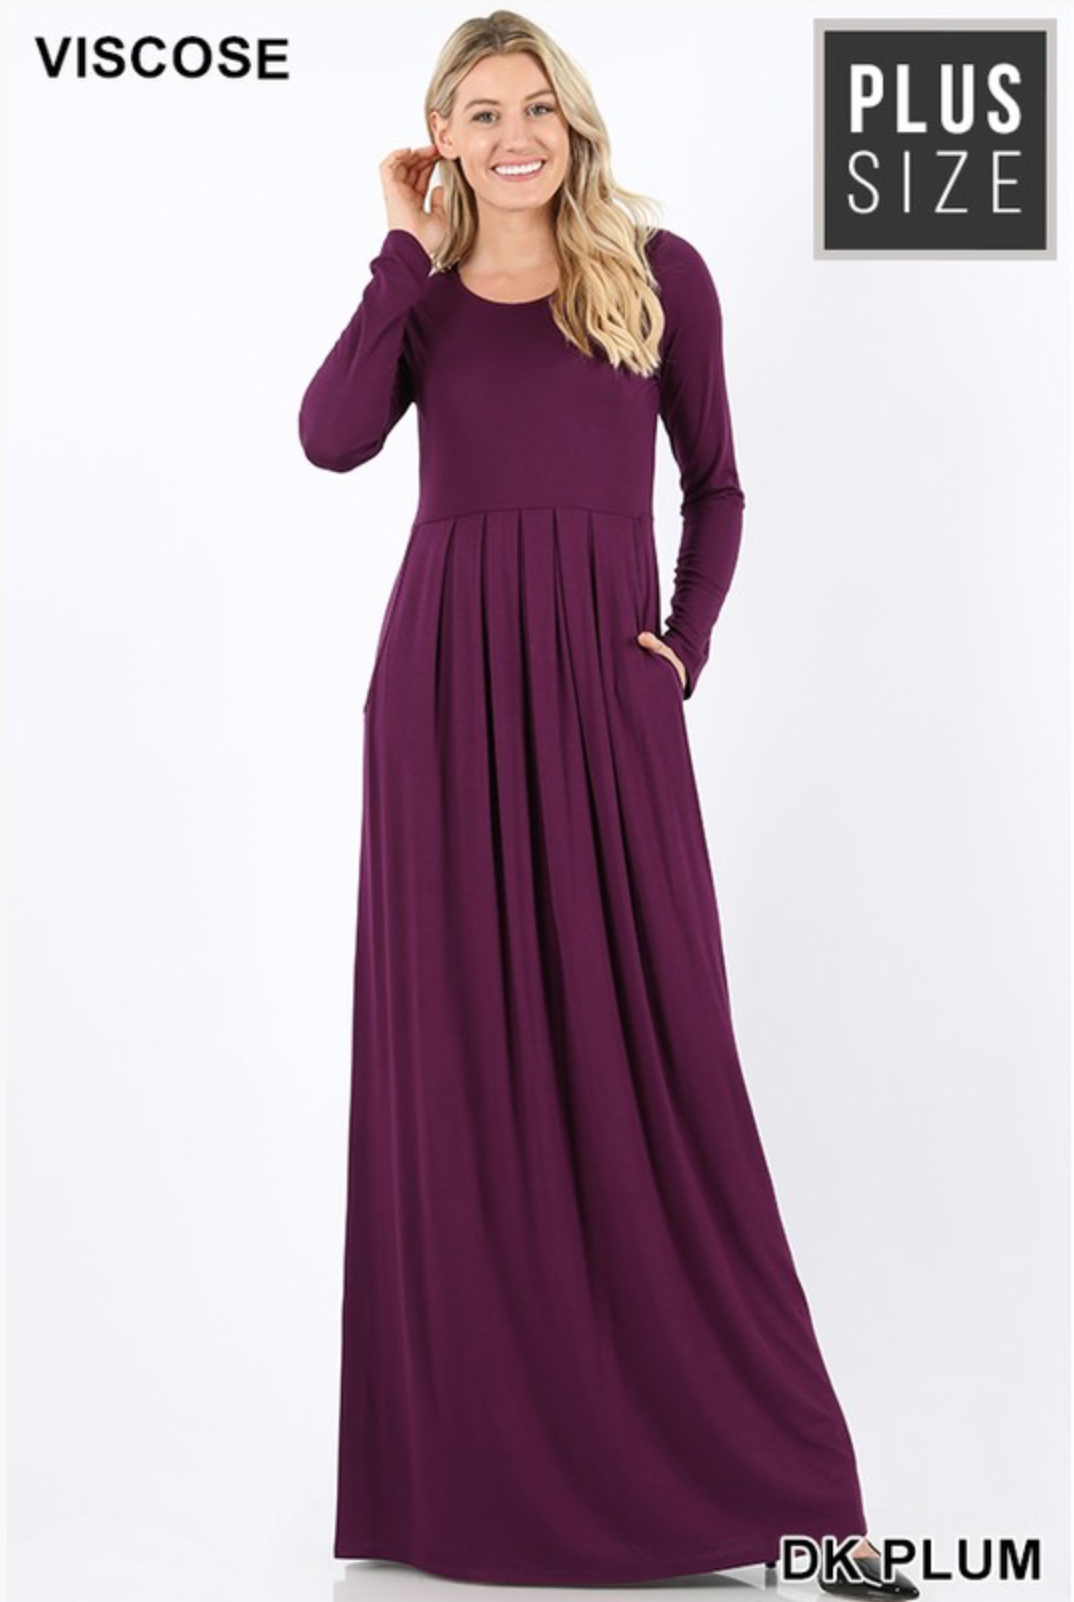 Long Sleeved Lounge Dress, , mouth-of-the-south-psf.myshopify.com, Mouth of the South PSF